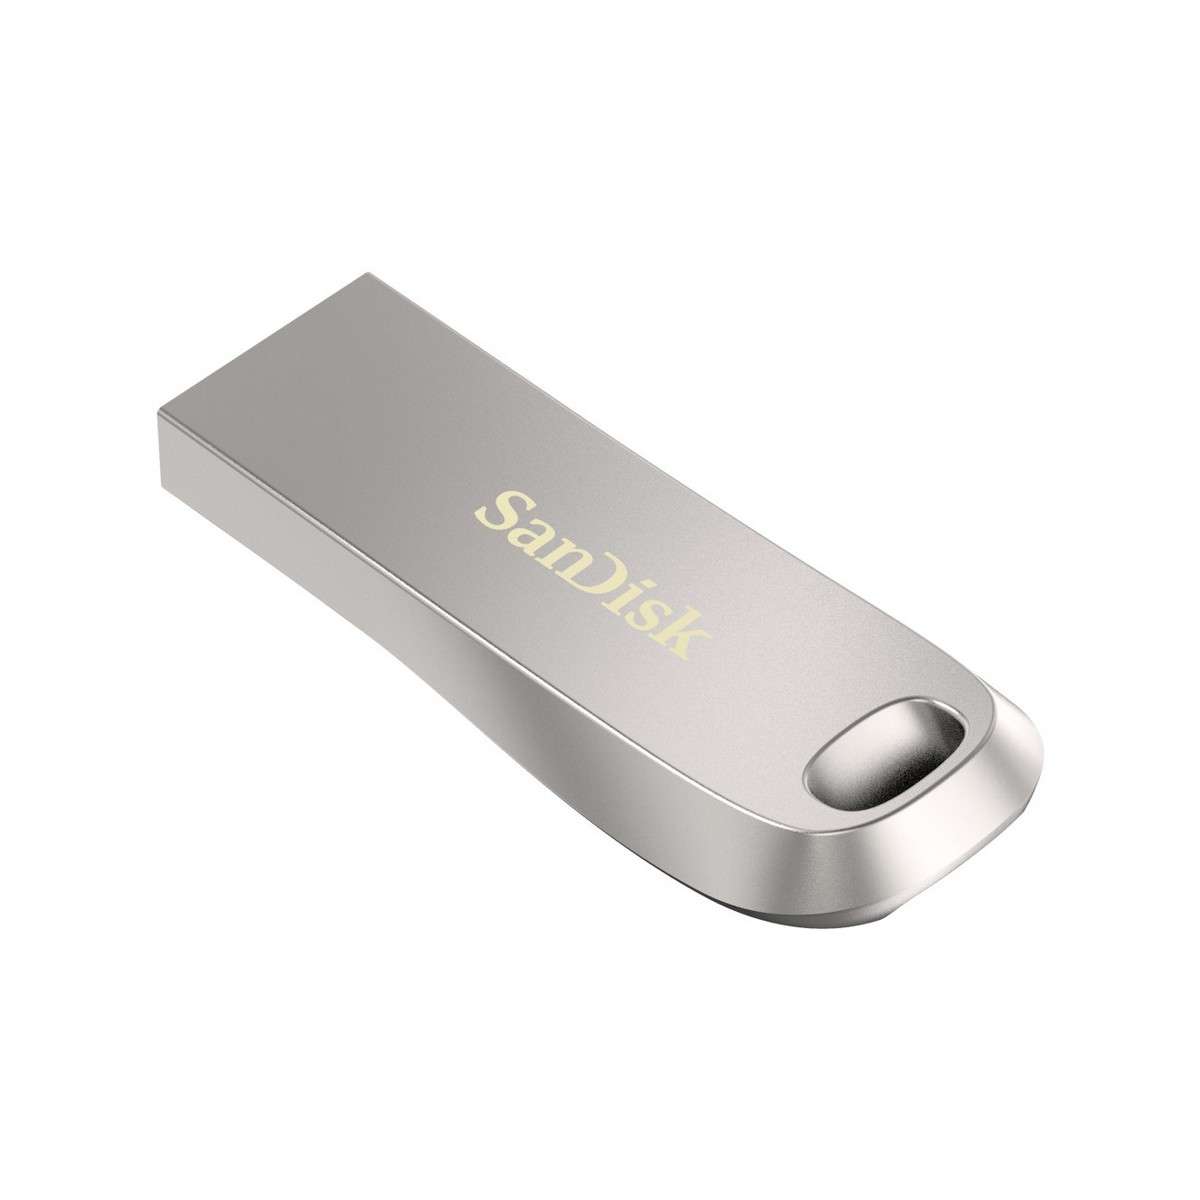 SANDISK ULTRA LUXE USB 3.1 32 GB SDCZ74-032G-G46